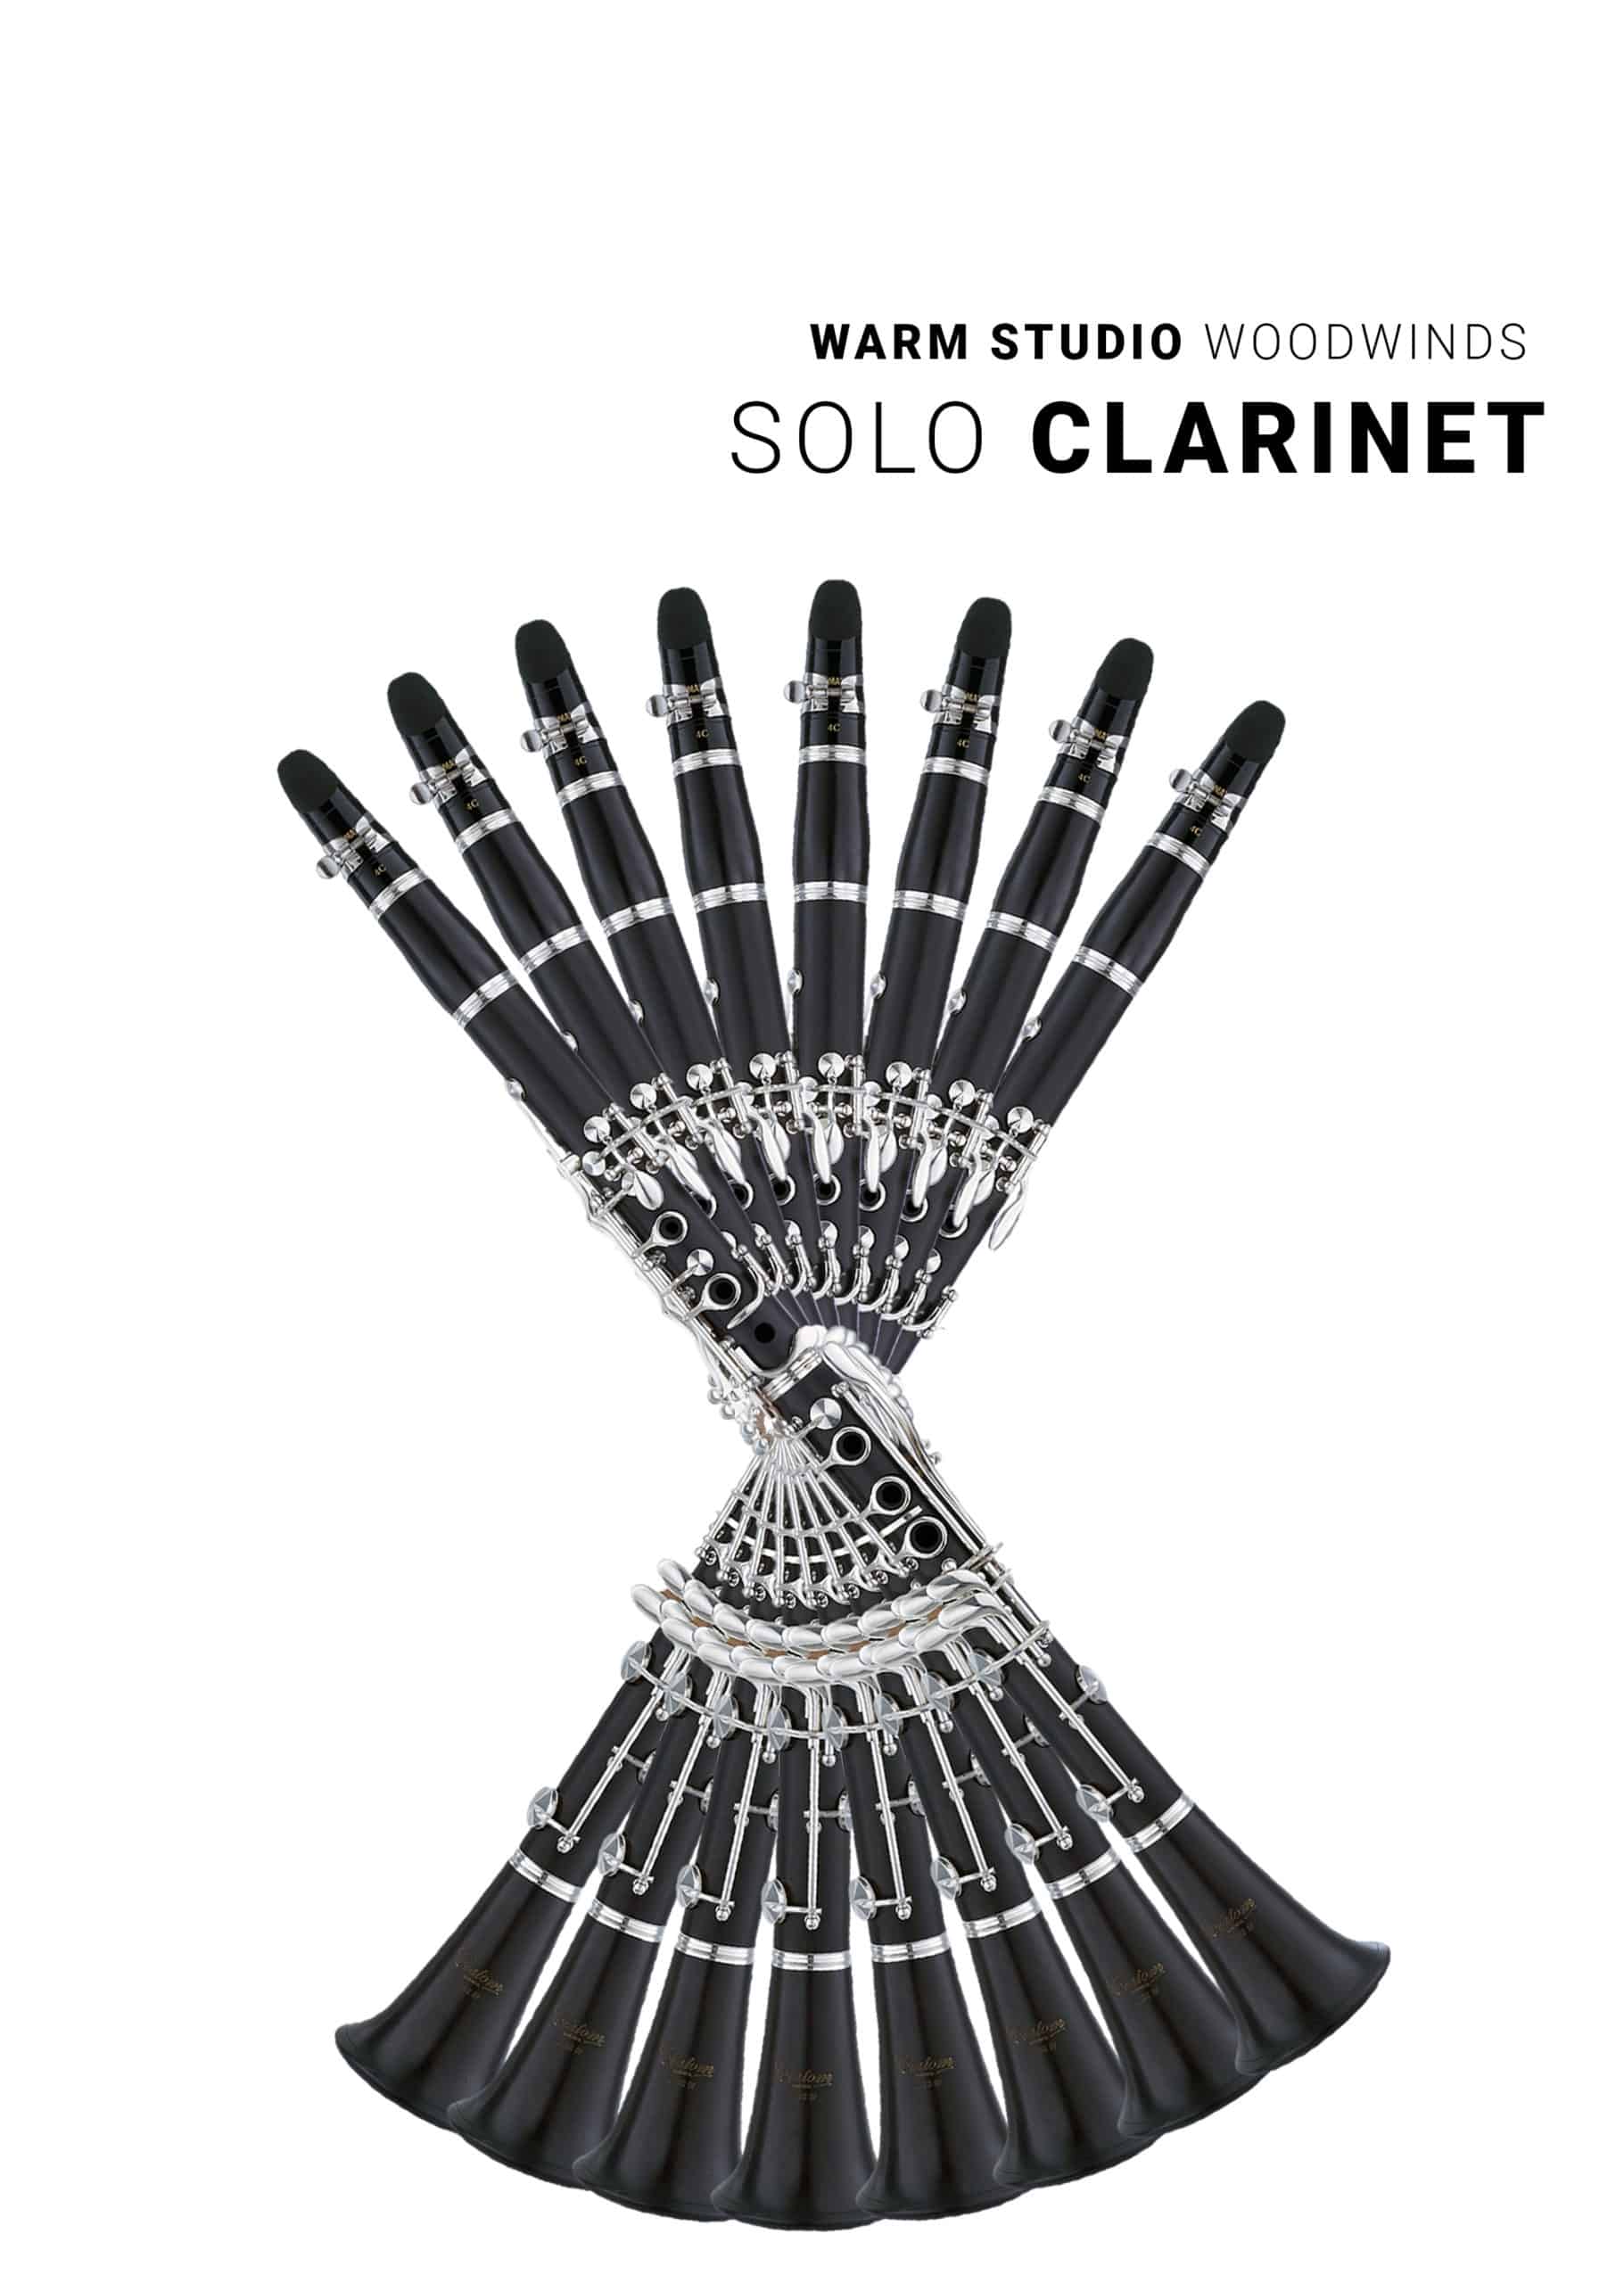 Solo Clarinet - Warm Studio Woodwinds - The Next Evolution of 8Dio's Woodwind Ensembles​